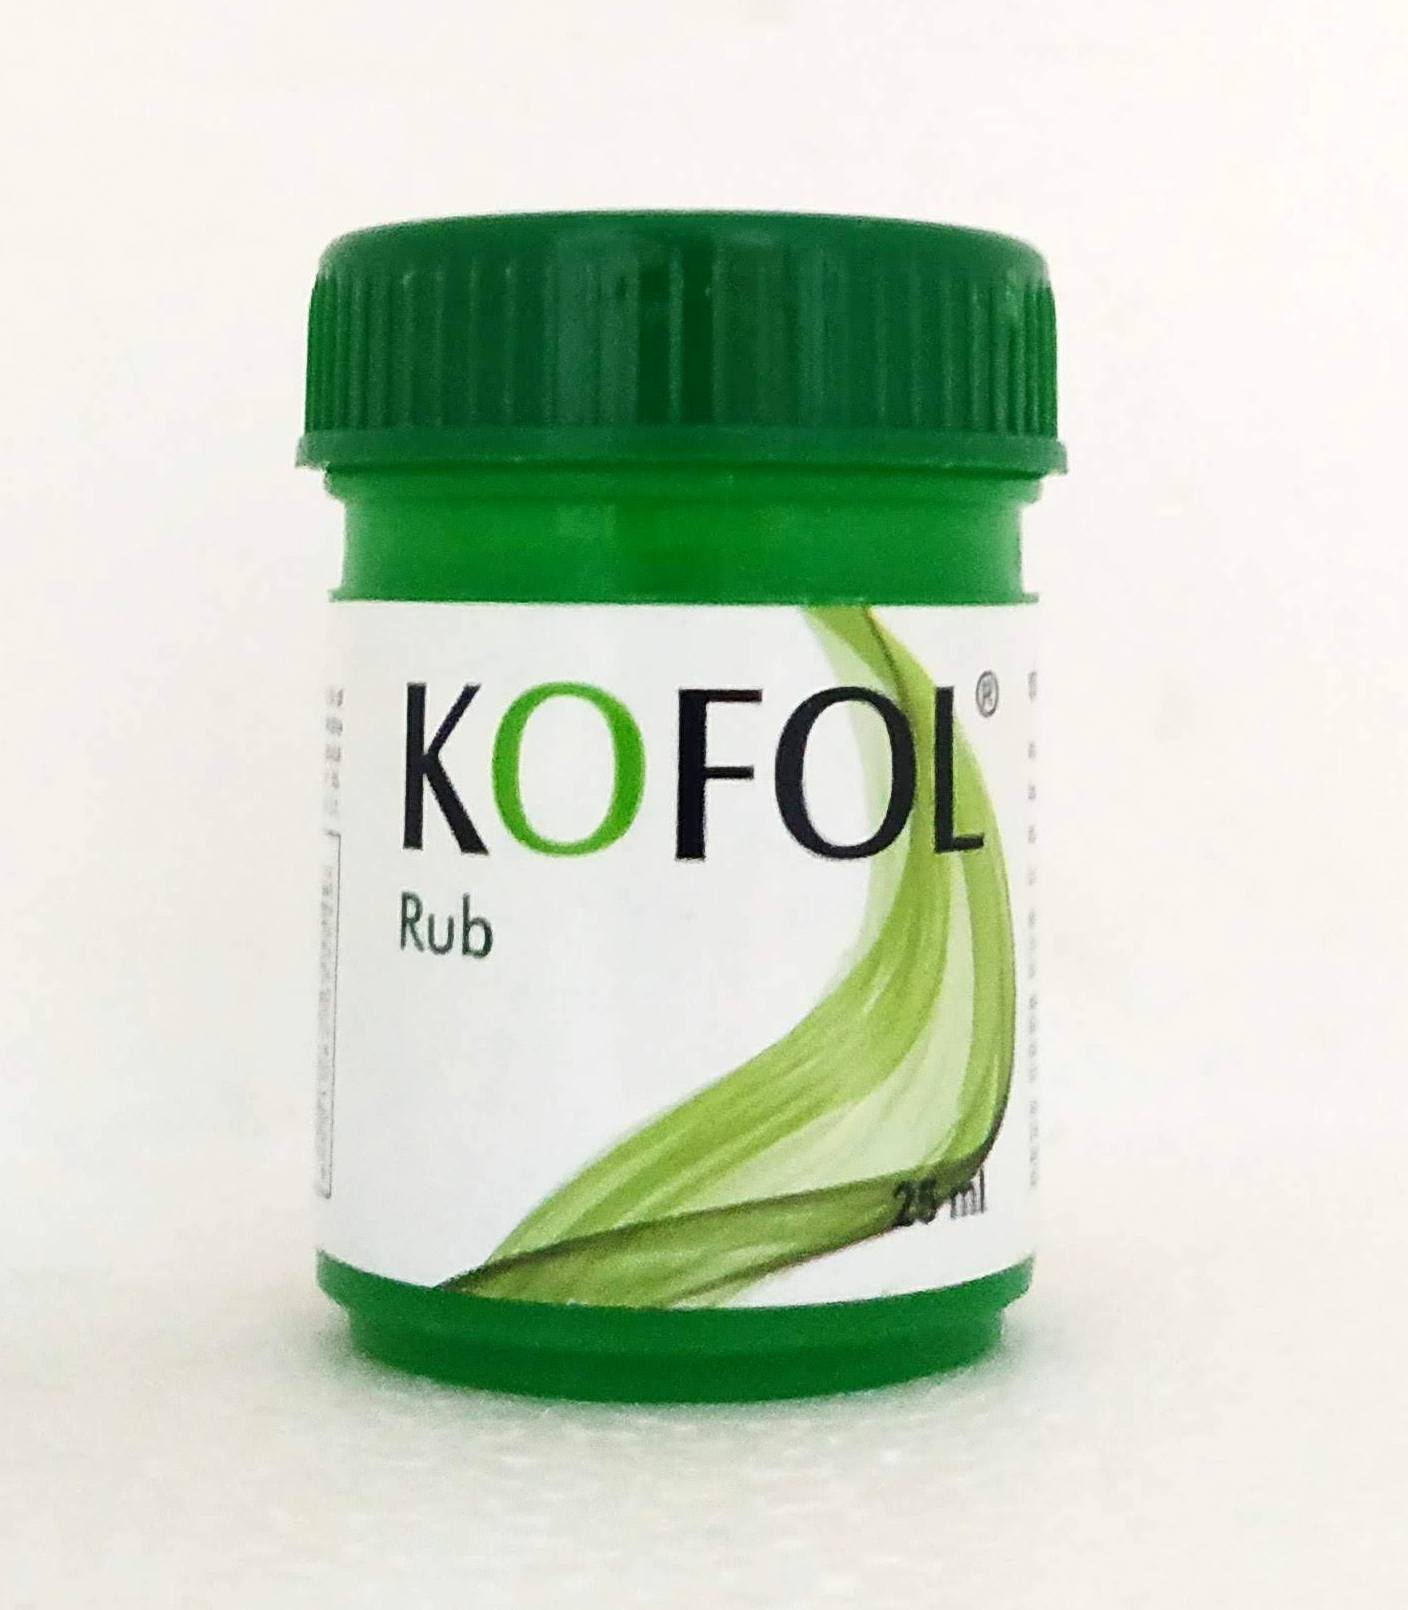 Shop Kofol rub 20gm at price 60.00 from Charak Online - Ayush Care